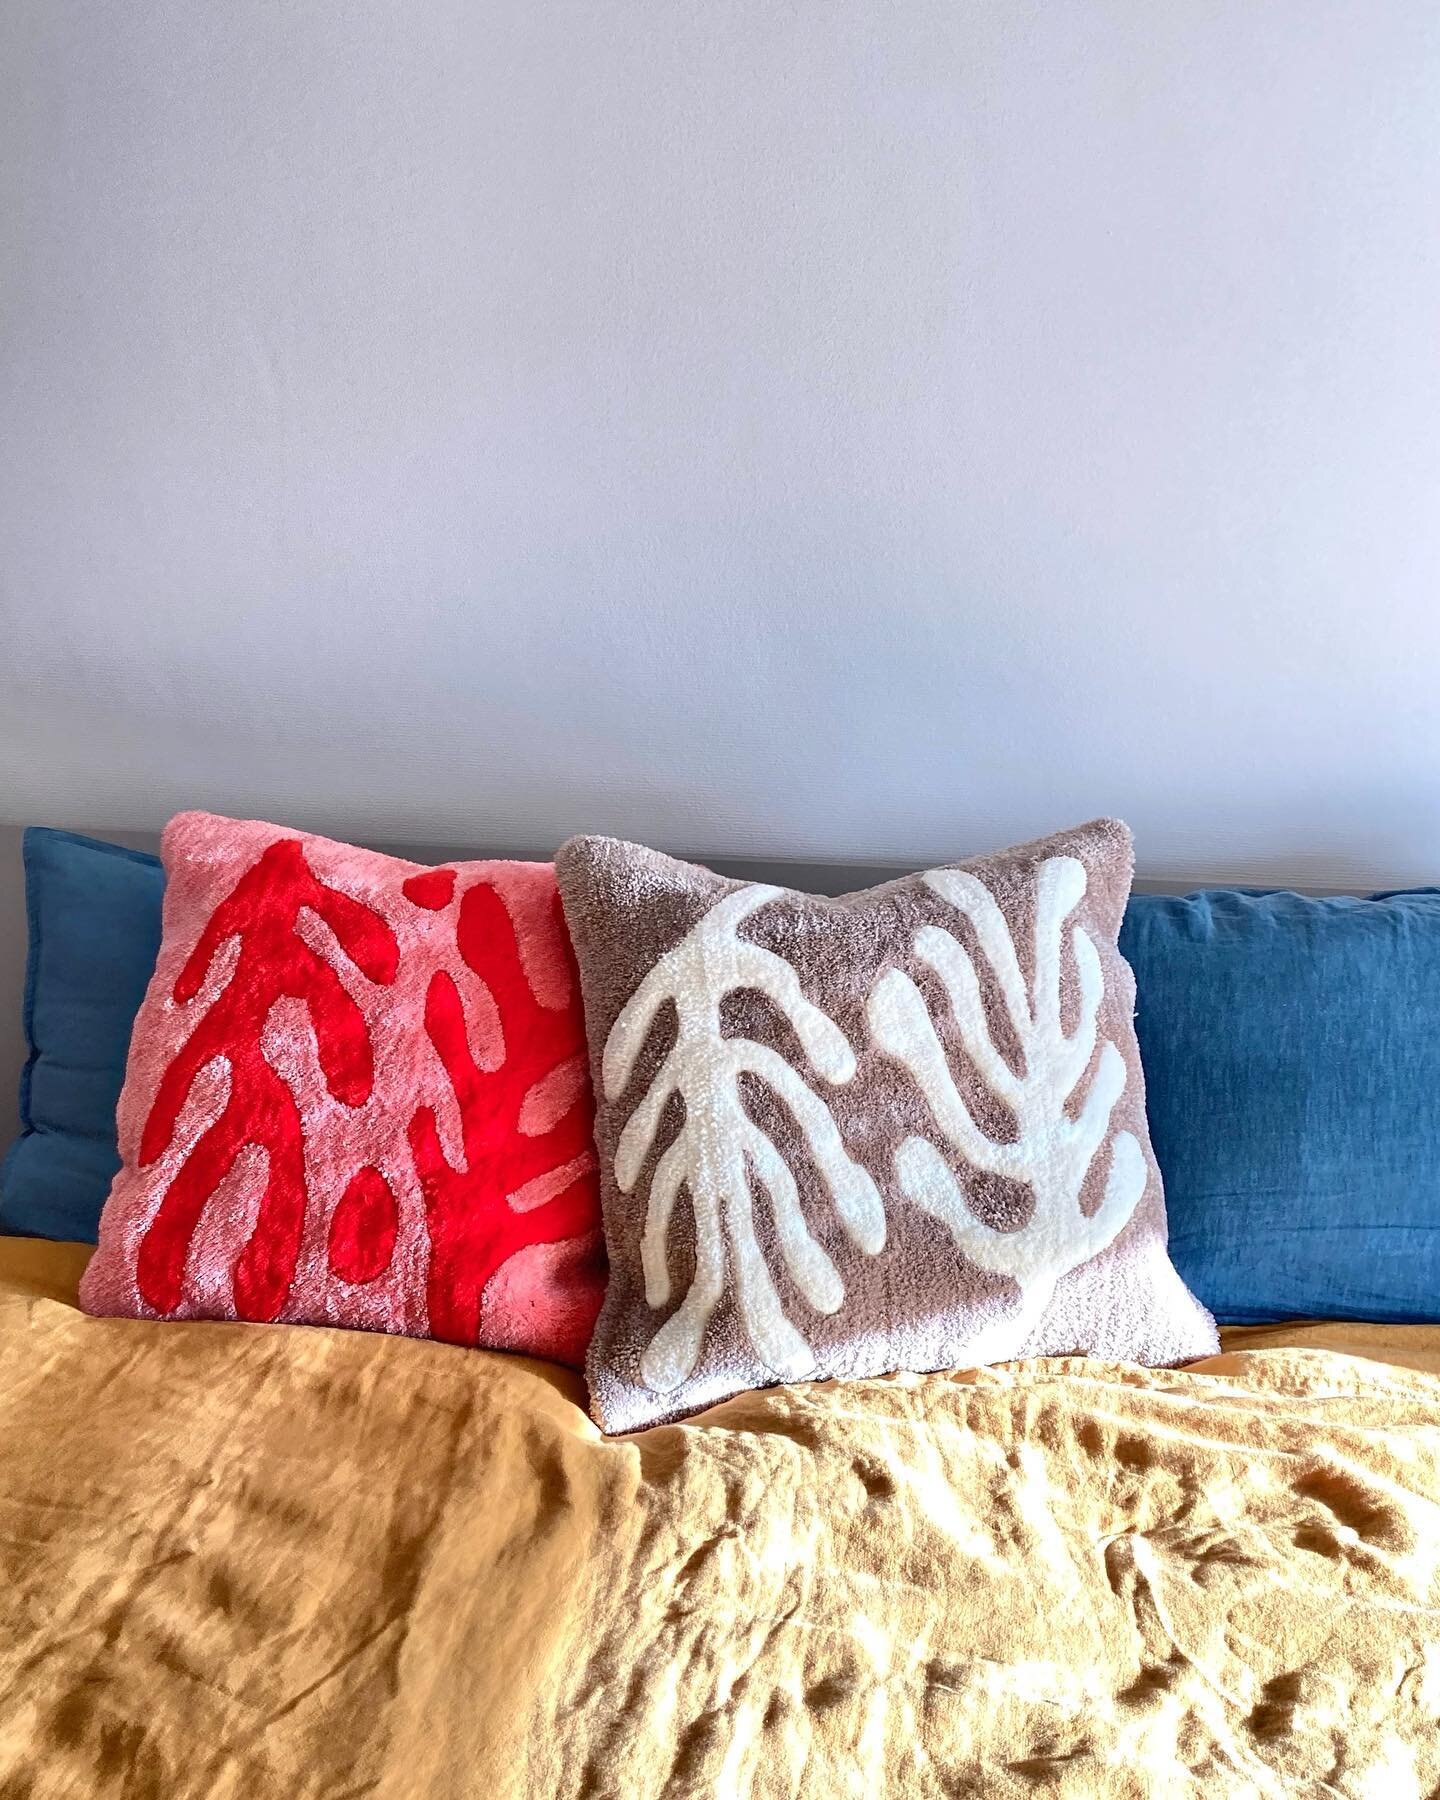 ☻ tufted pillows ☻
🛒 find them on my Etsy shop or send me a direct message to purchase! 

Size📏: 60 x 60cm
Technique : Tufting 
Acrylic wool, cotton velours backing 
💸 : 150&euro; 

Etsy: shopjudesigns 🌸
Tufting account: @ju_tufting 

#tufting #t